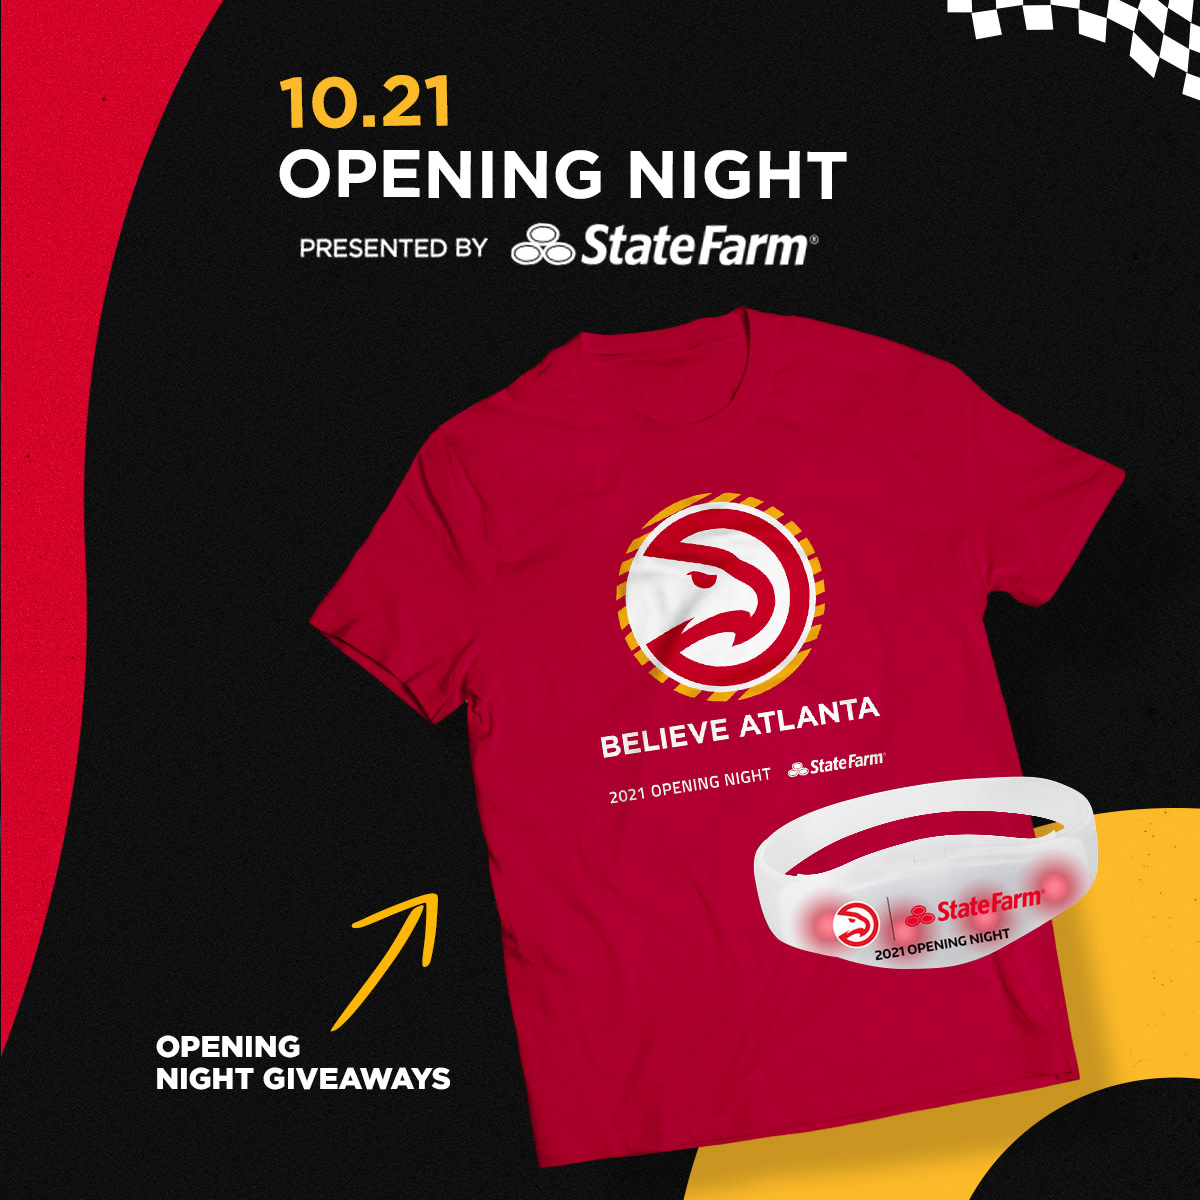 Fans in attendance for the Hawks and Mavericks game will receive a free red “Believe Atlanta” T-shirt and light-up wristband courtesy of State Farm